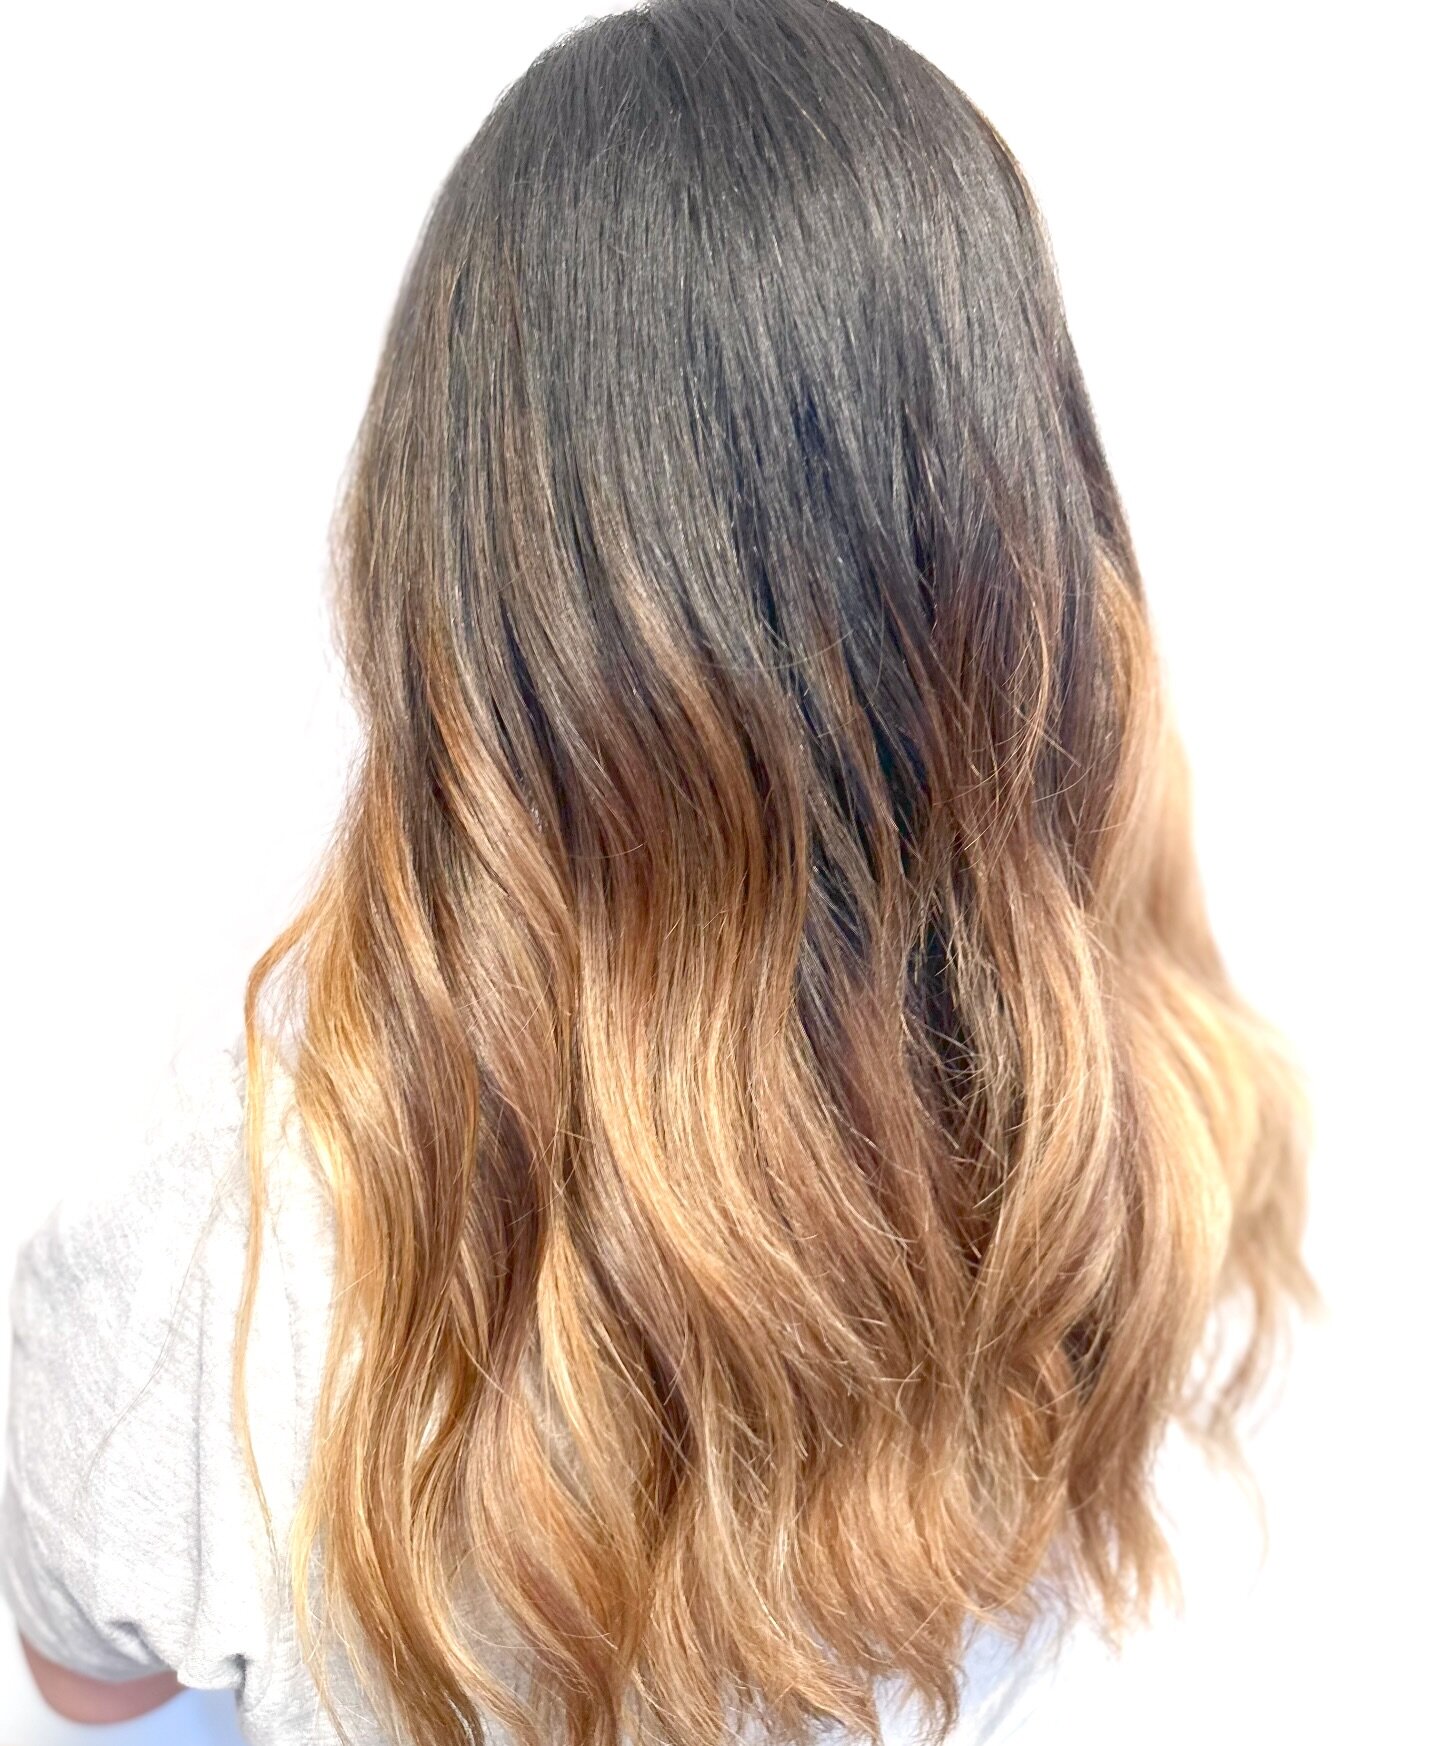 Beautiful ombr&eacute; from Kyung. @_hairapy_by_kyung_ 
.
.
.
#lowtoxhaircolor #lowtoxliving #sustainablesalon #greensalon #ecofriendlyproducts